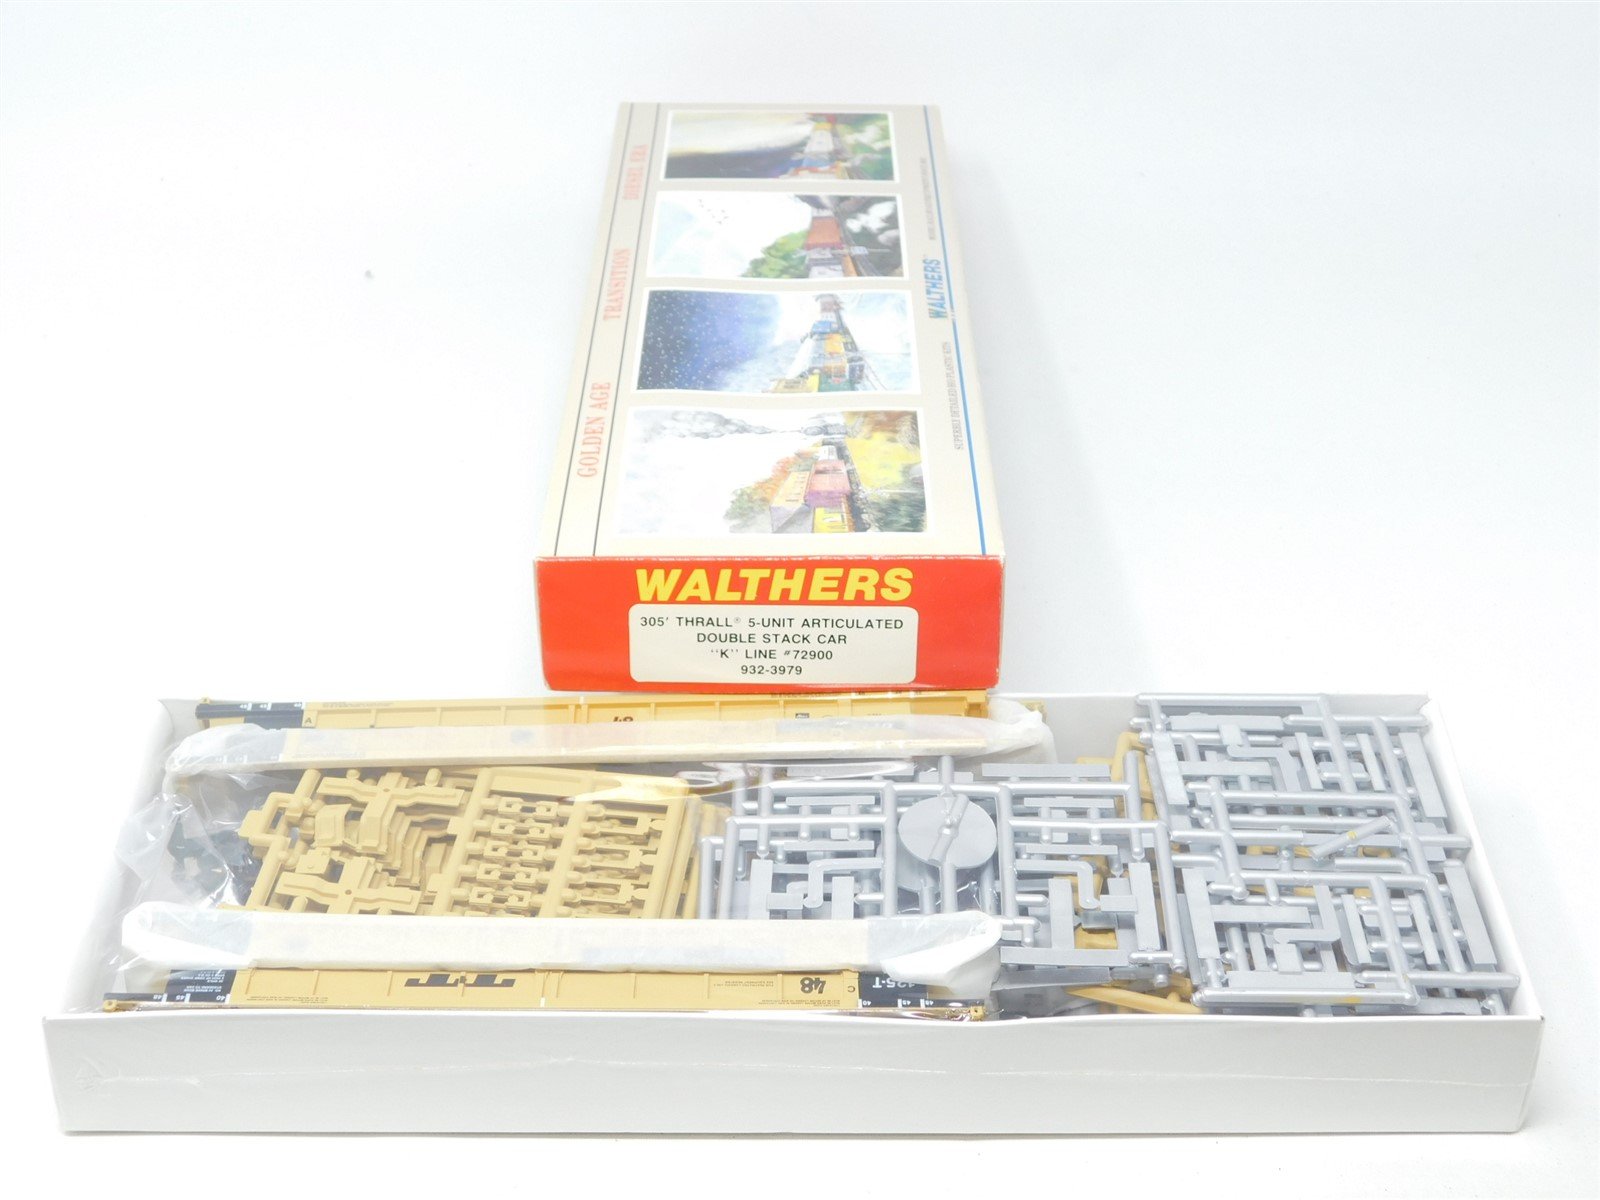 HO Scale Walthers Kit #932-3979 DTTX "K" Line 5-Unit Double Stack Car #72900